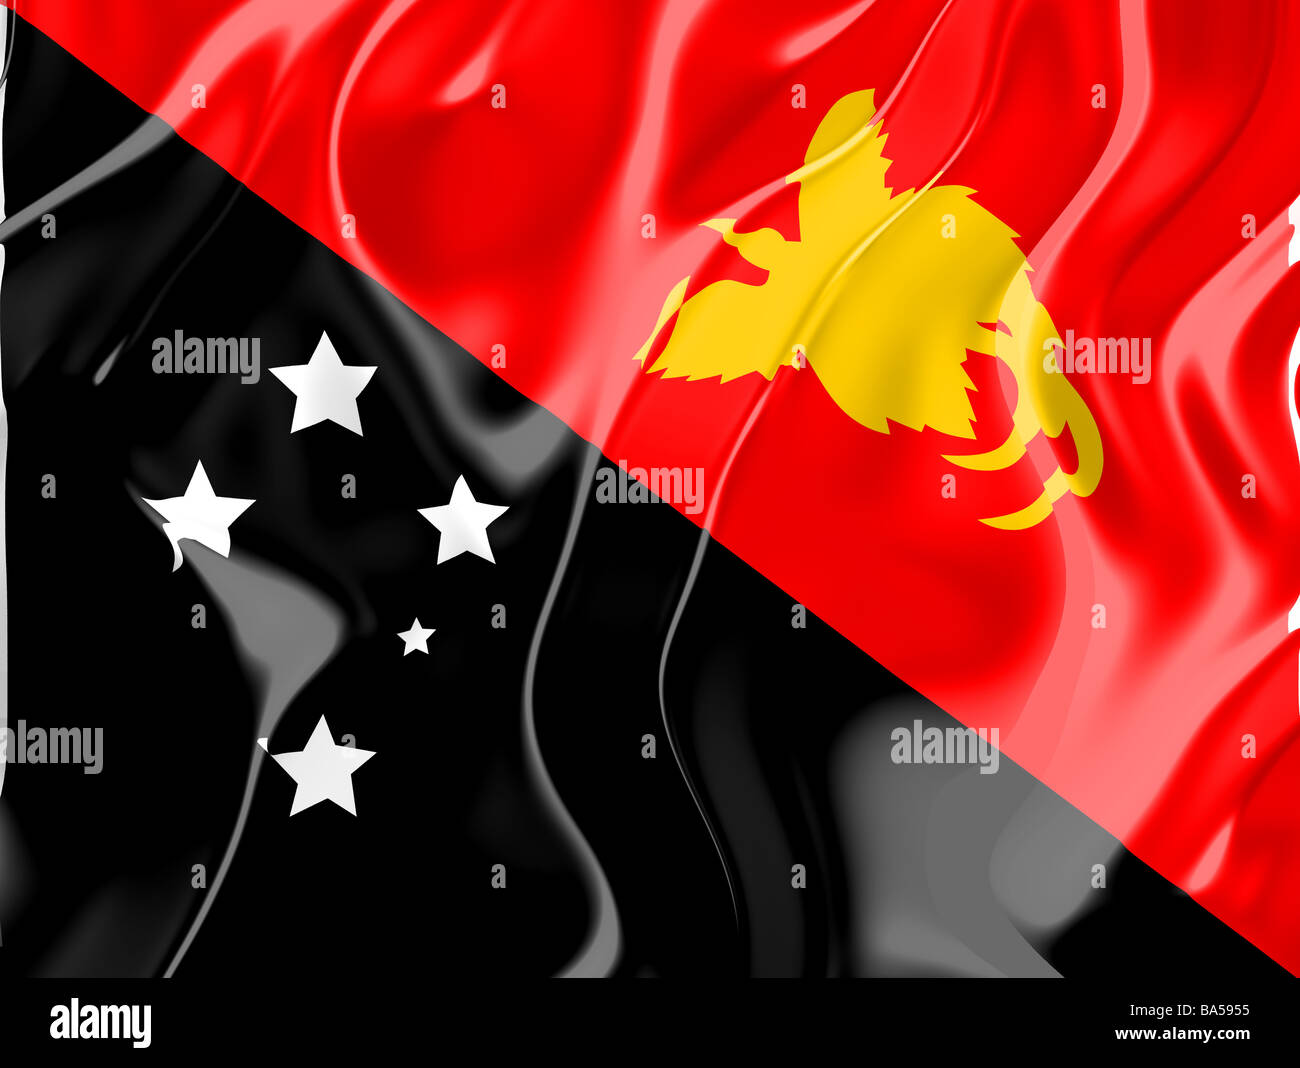 Flag of Papua New Guinea national country symbol illustration Stock Photo